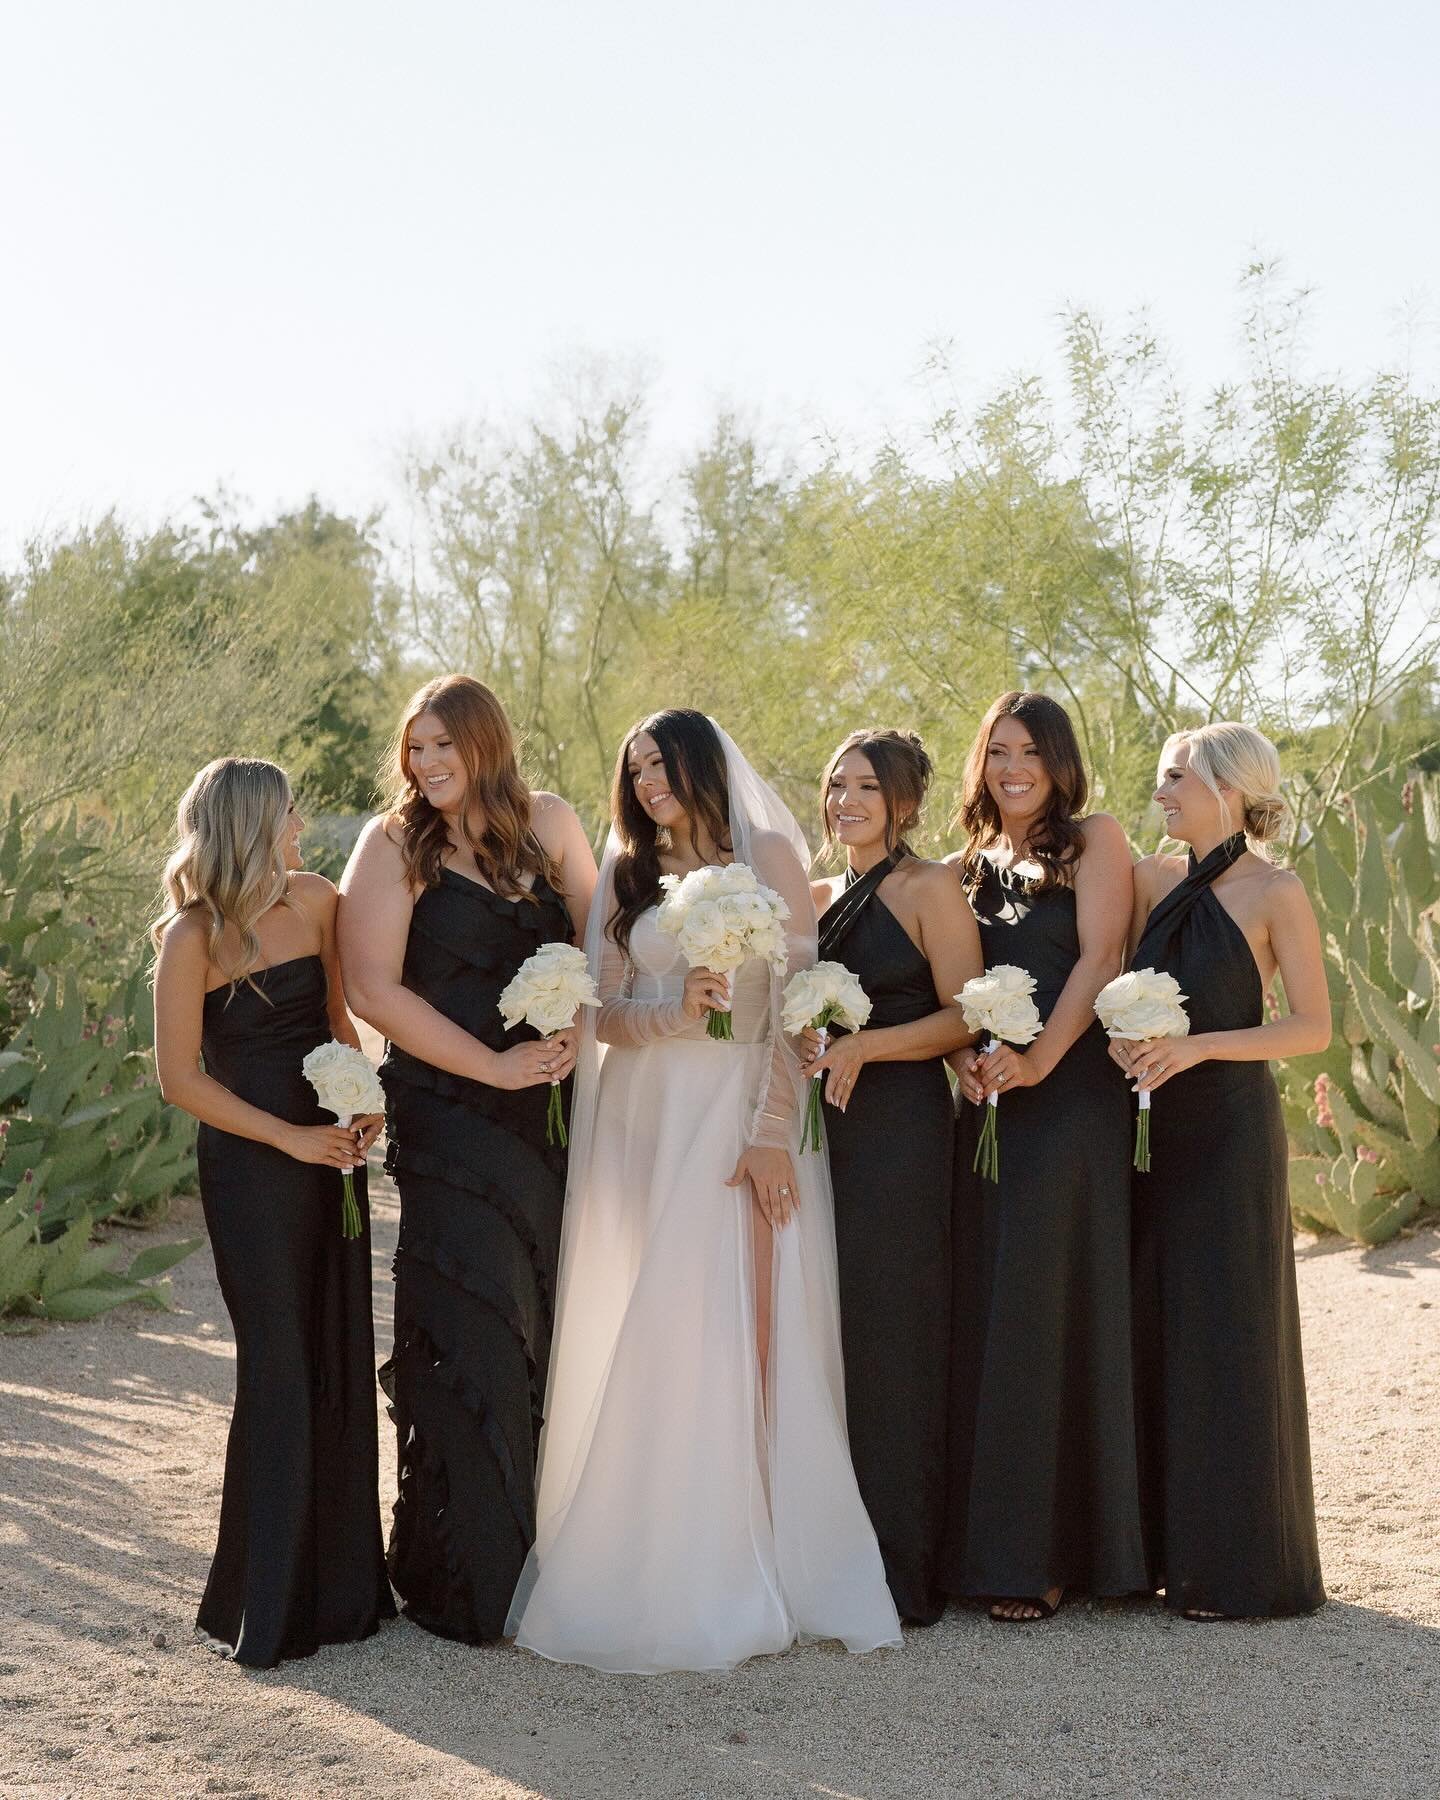 Desert romance and a very chic bridal party 🖤🖤🖤
Planning &amp; Design: @cmg_events 
Photo: @kristinaadamsphoto 
Floral: @mintgreendesign 
Beauty: @tpassifionemakeup @lebeigebeauty 
Venue: @andazscottsdaleweddings 
#andazscottsdale #andazscottsdale